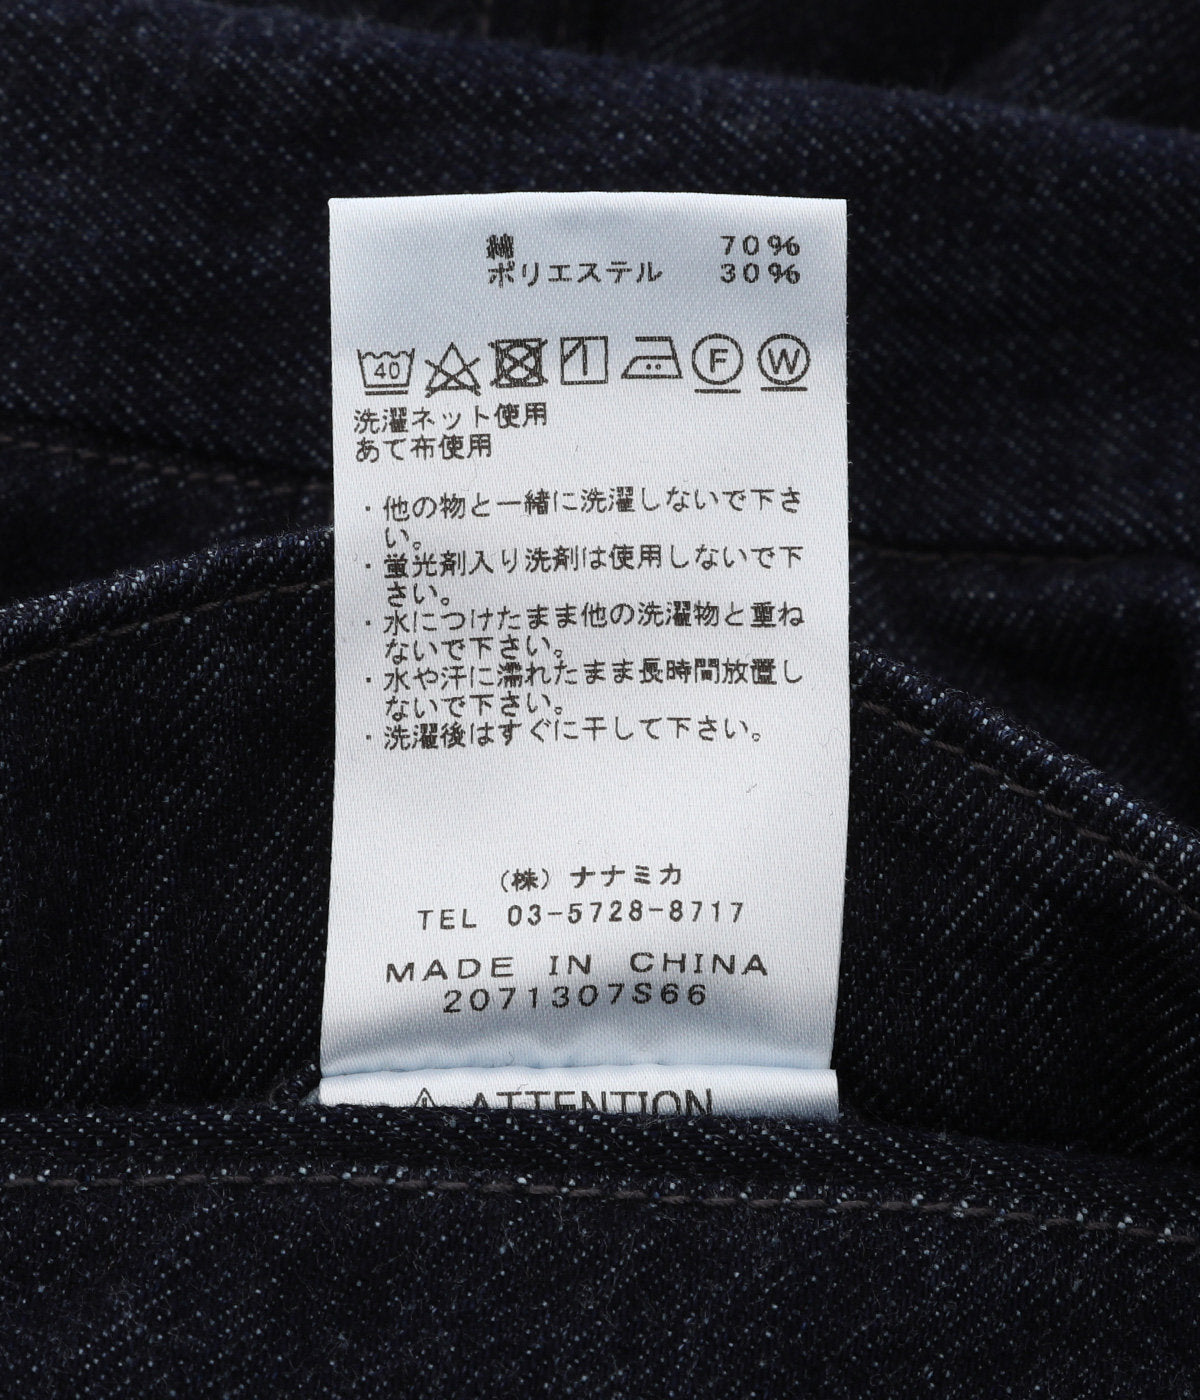 THE NORTH FACE PURPLE LABEL Denim Wide Tapered Pants – unexpected store